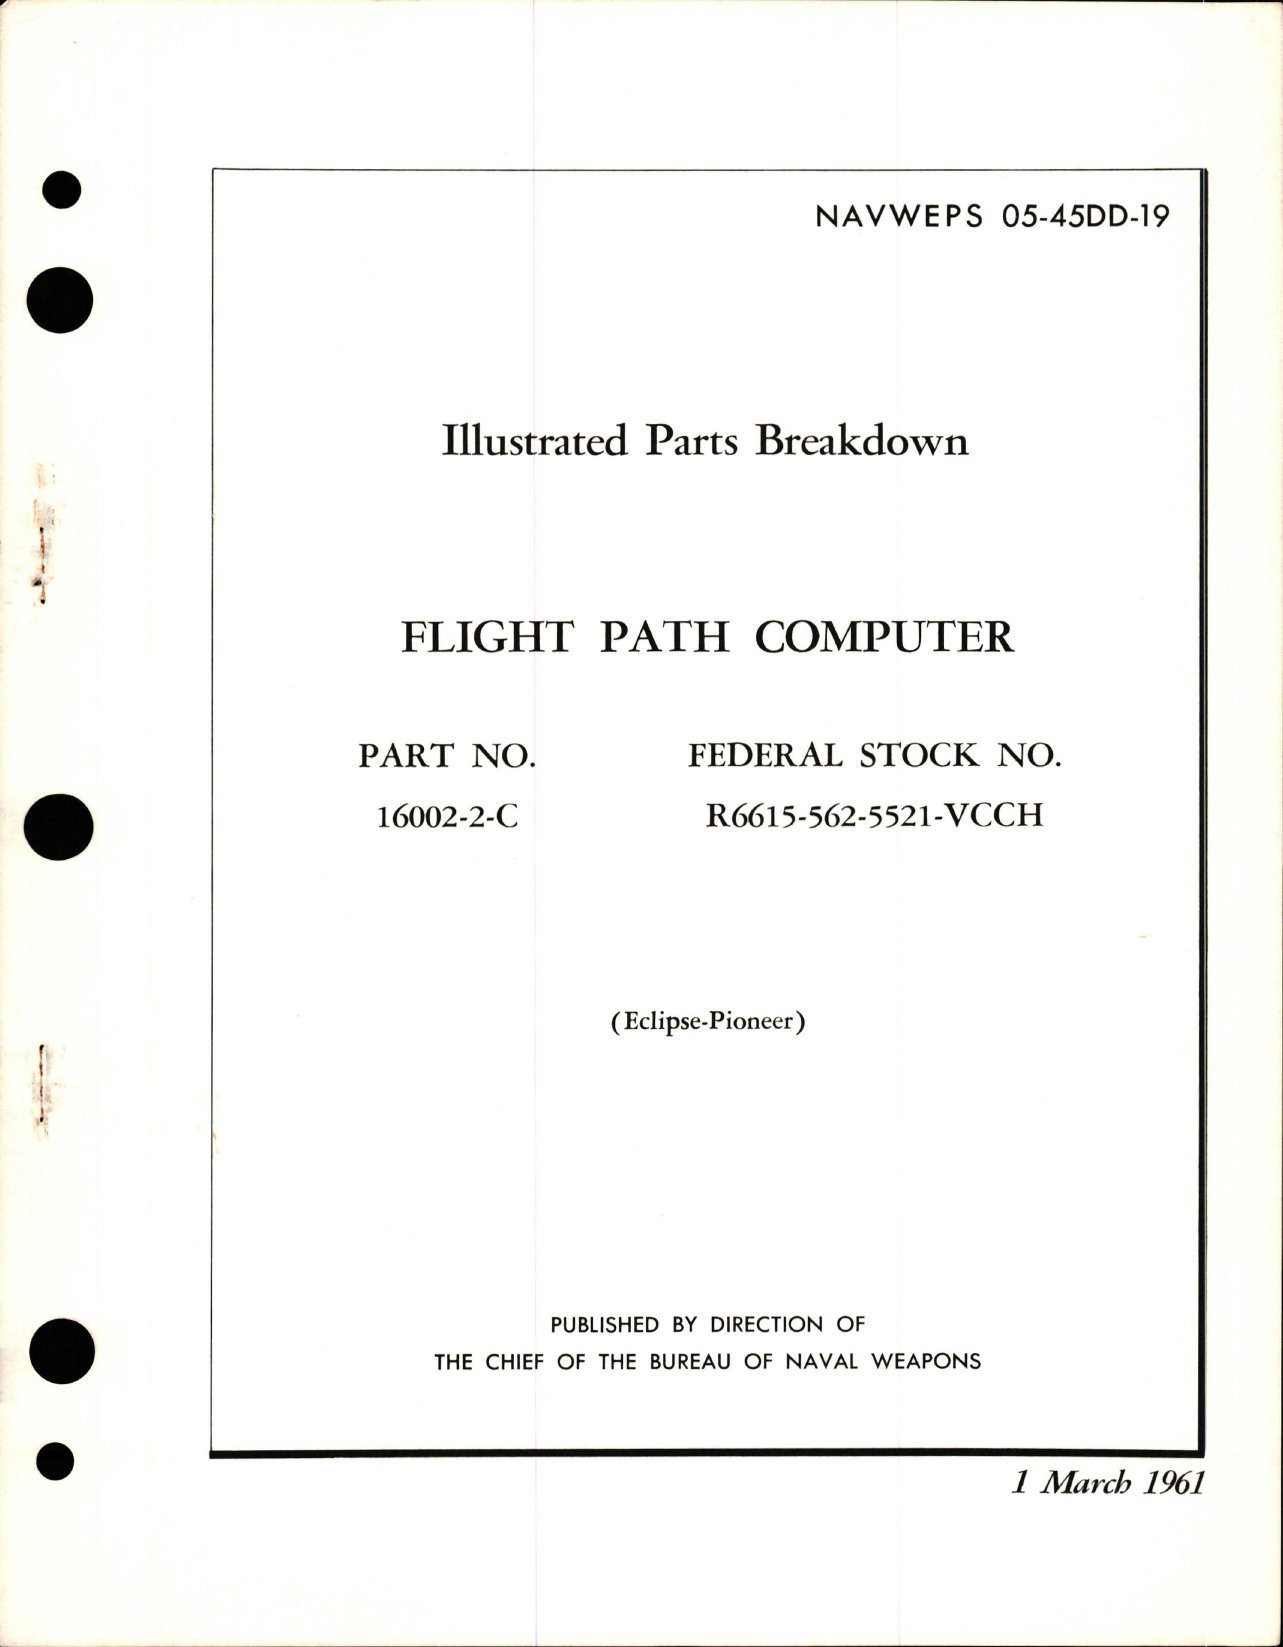 Sample page 1 from AirCorps Library document: Illustrated Parts Breakdown for Flight Path Computer - Part 16002-2-C